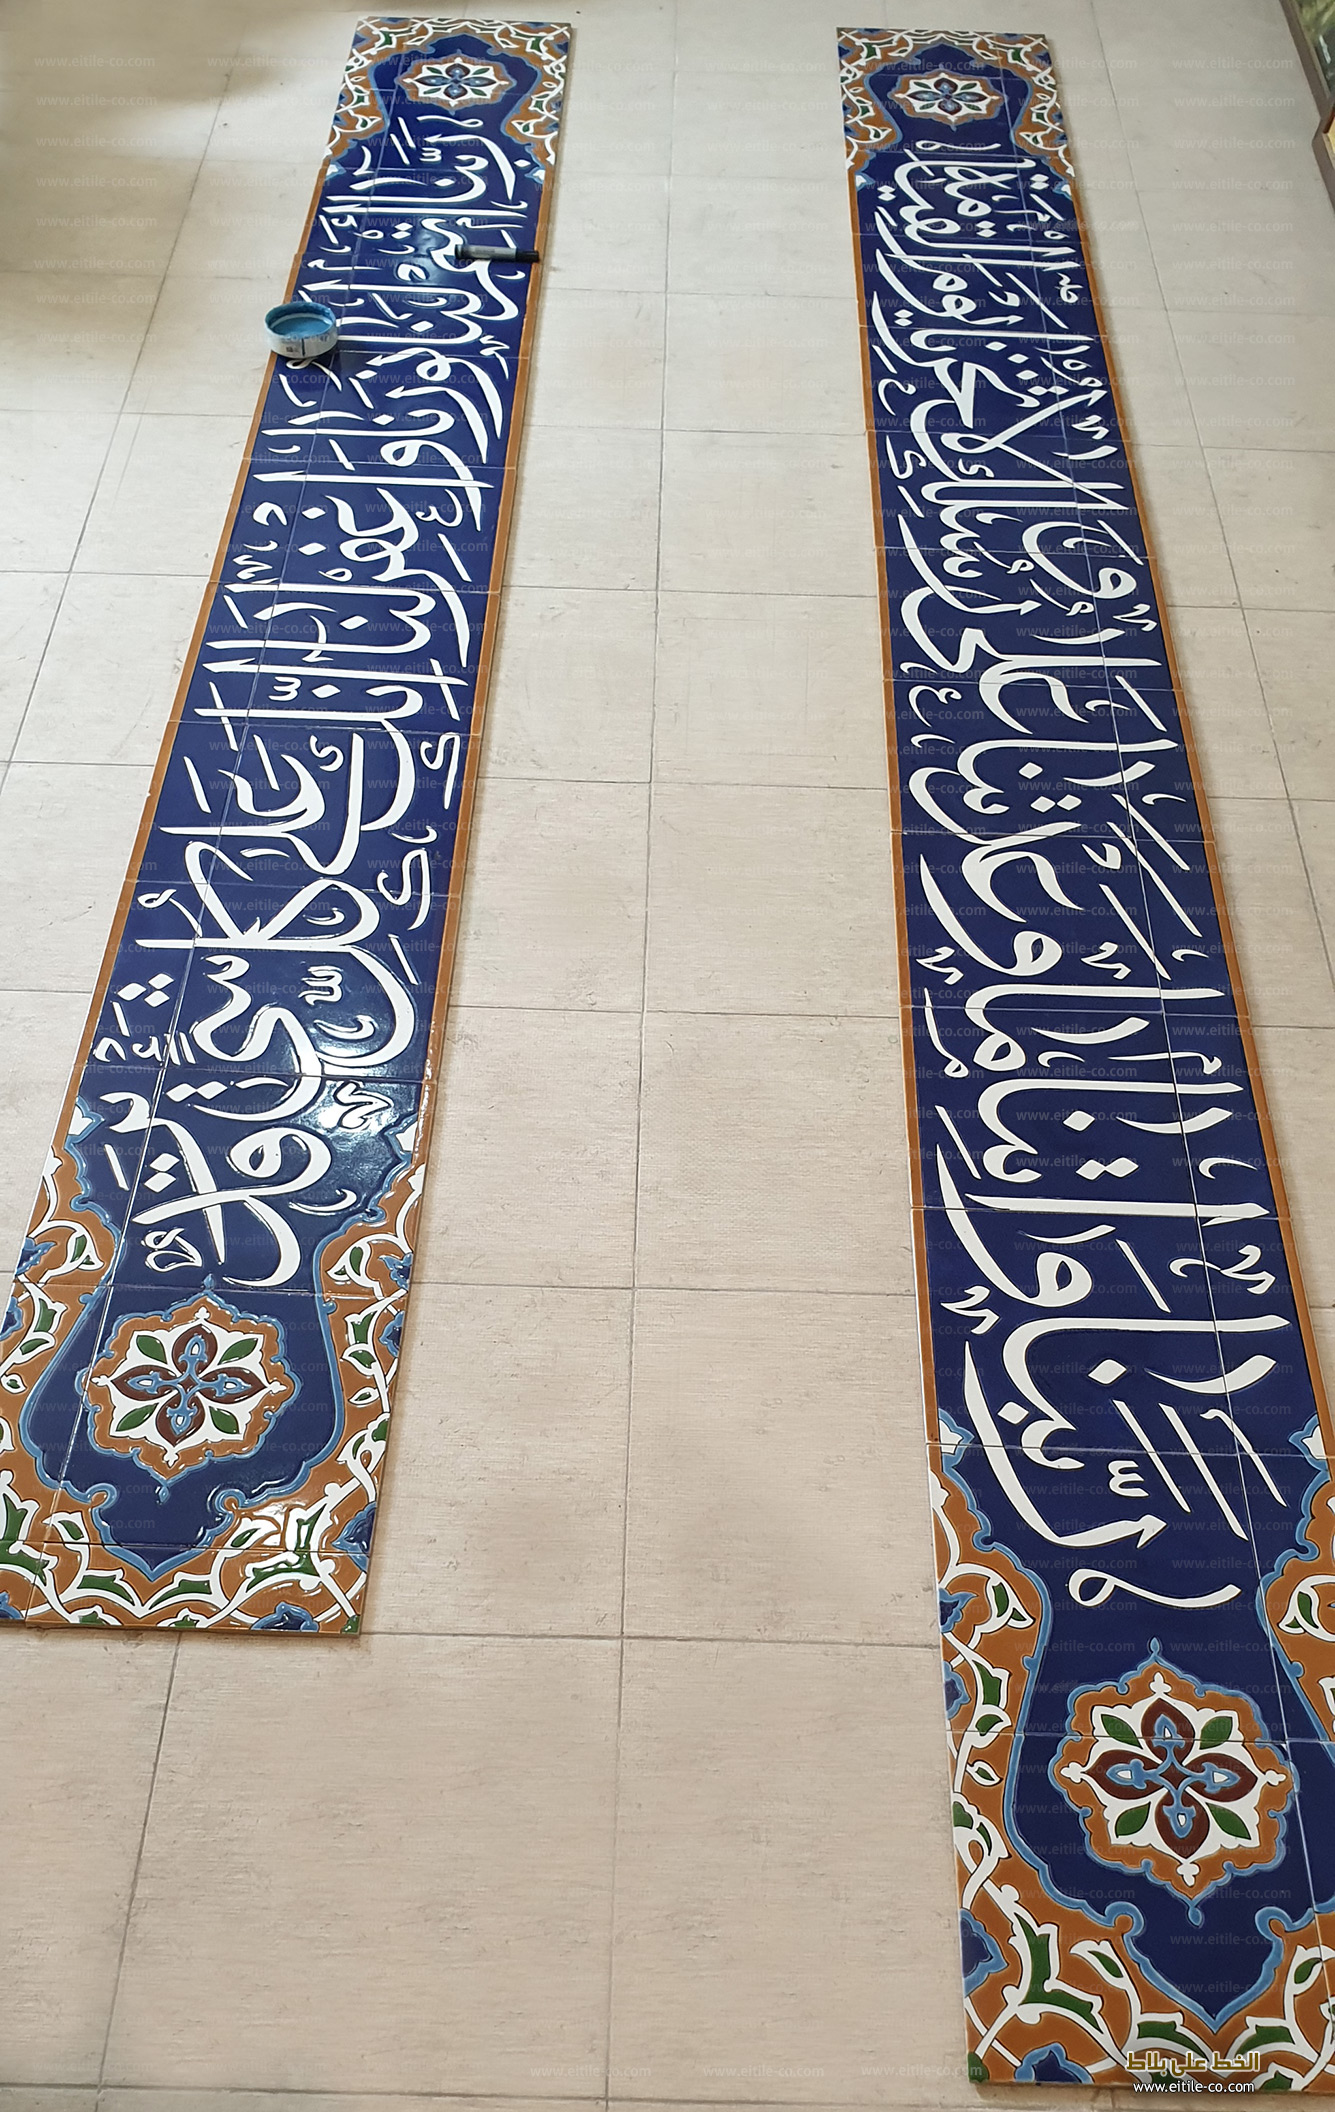 Calligraphy art on Islamic handmade tiles for mosque, www.eitile-co.com